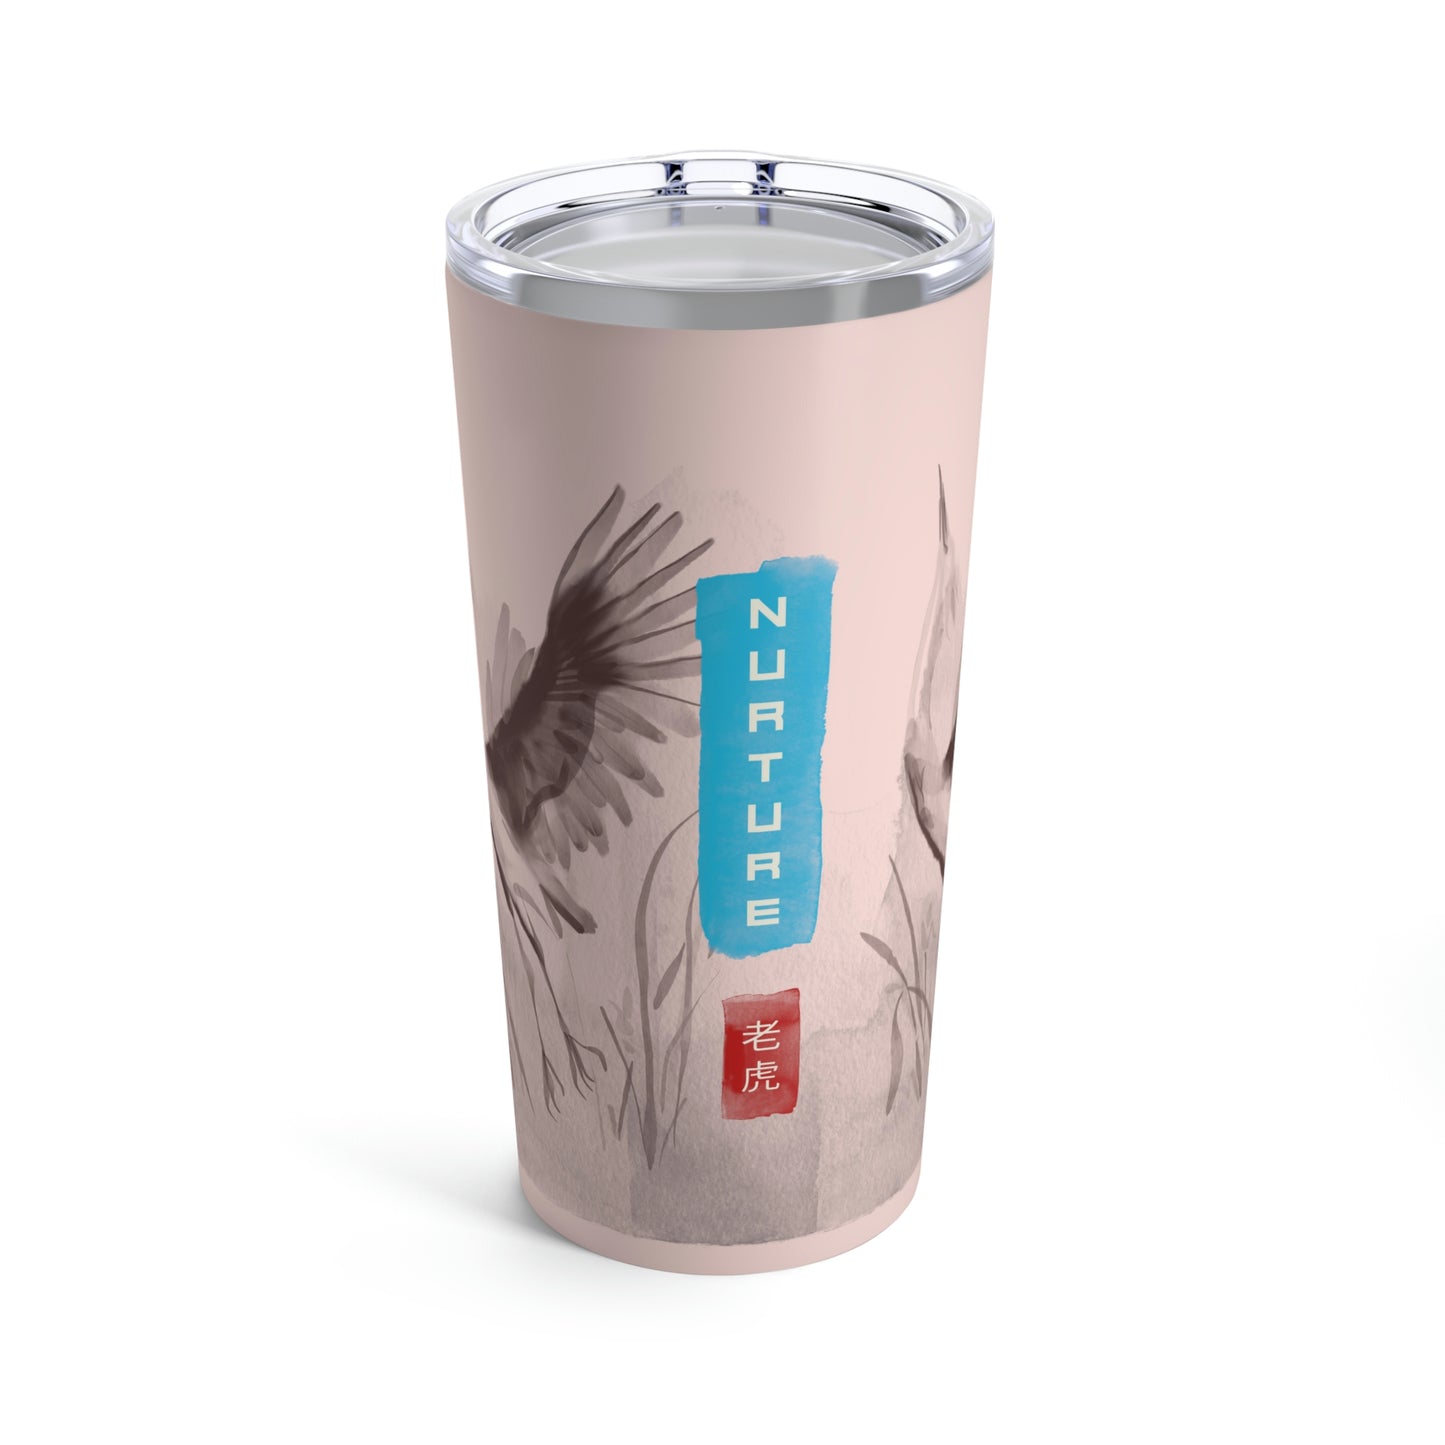 Women's Family Proclamation "Nurture" Inspired Insulated Steel Tumbler 20oz